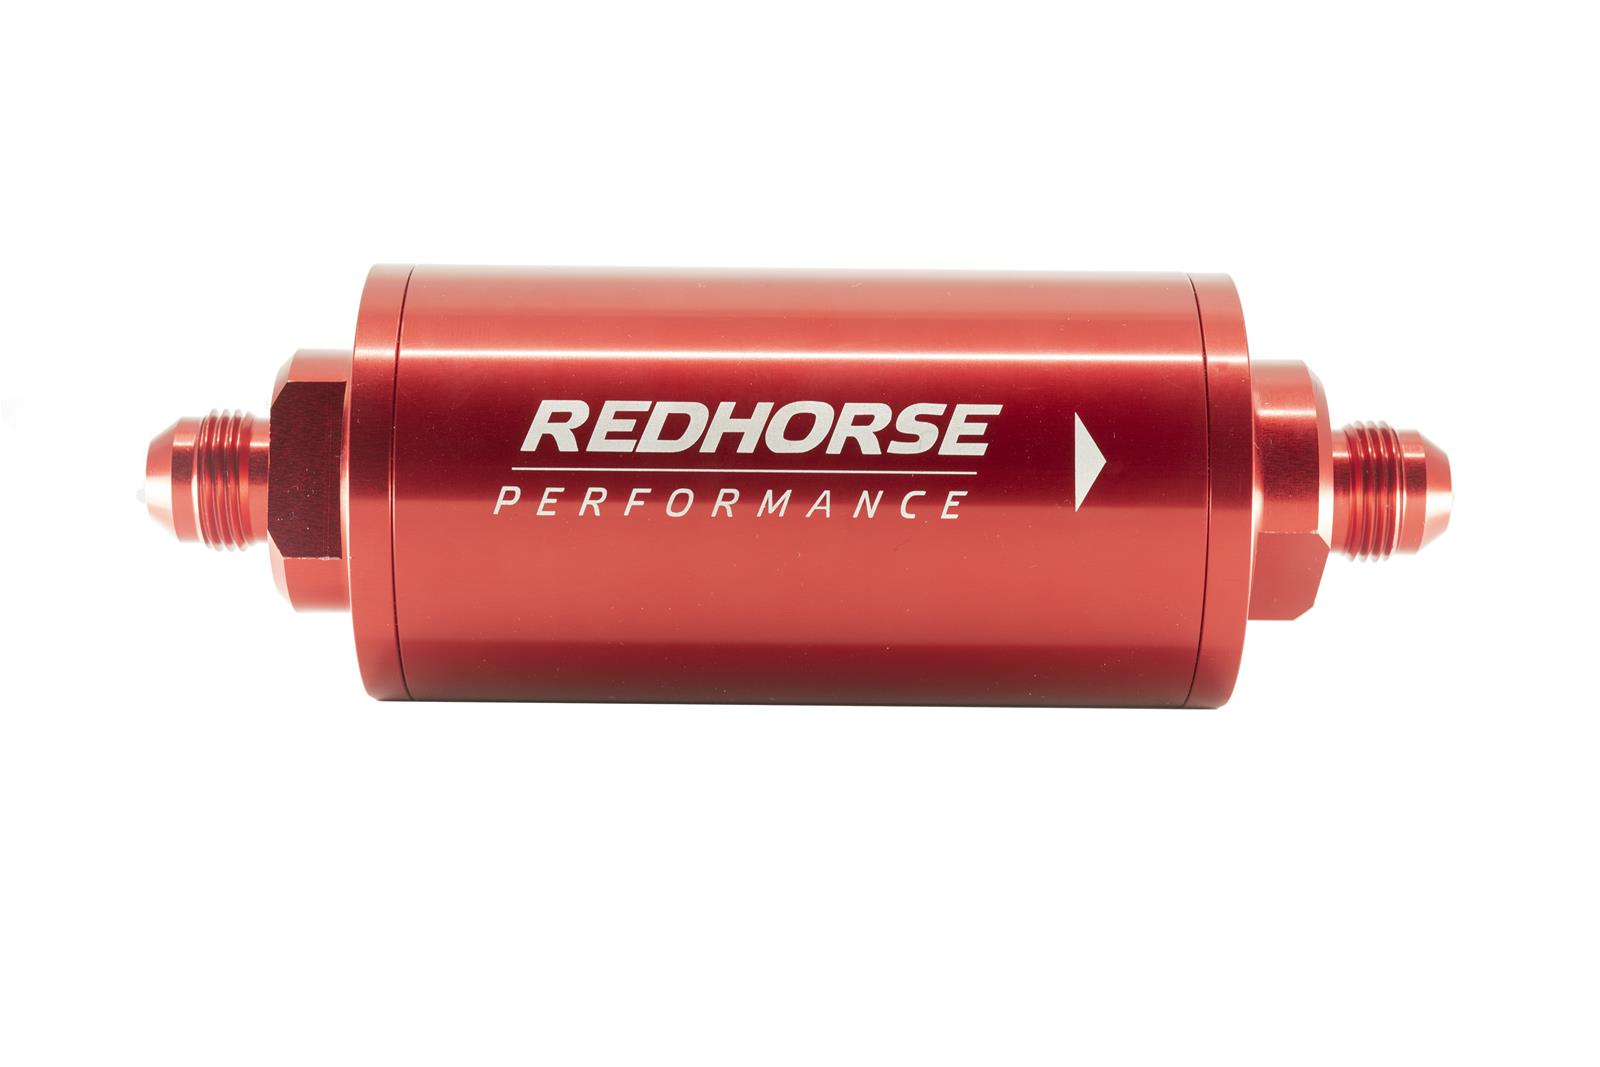 Redhorse Performance 4651-06-3-12 6in Cylindrical In-Line Race Fuel Filter w/ 12 Micron Fiberglass element - 06 AN